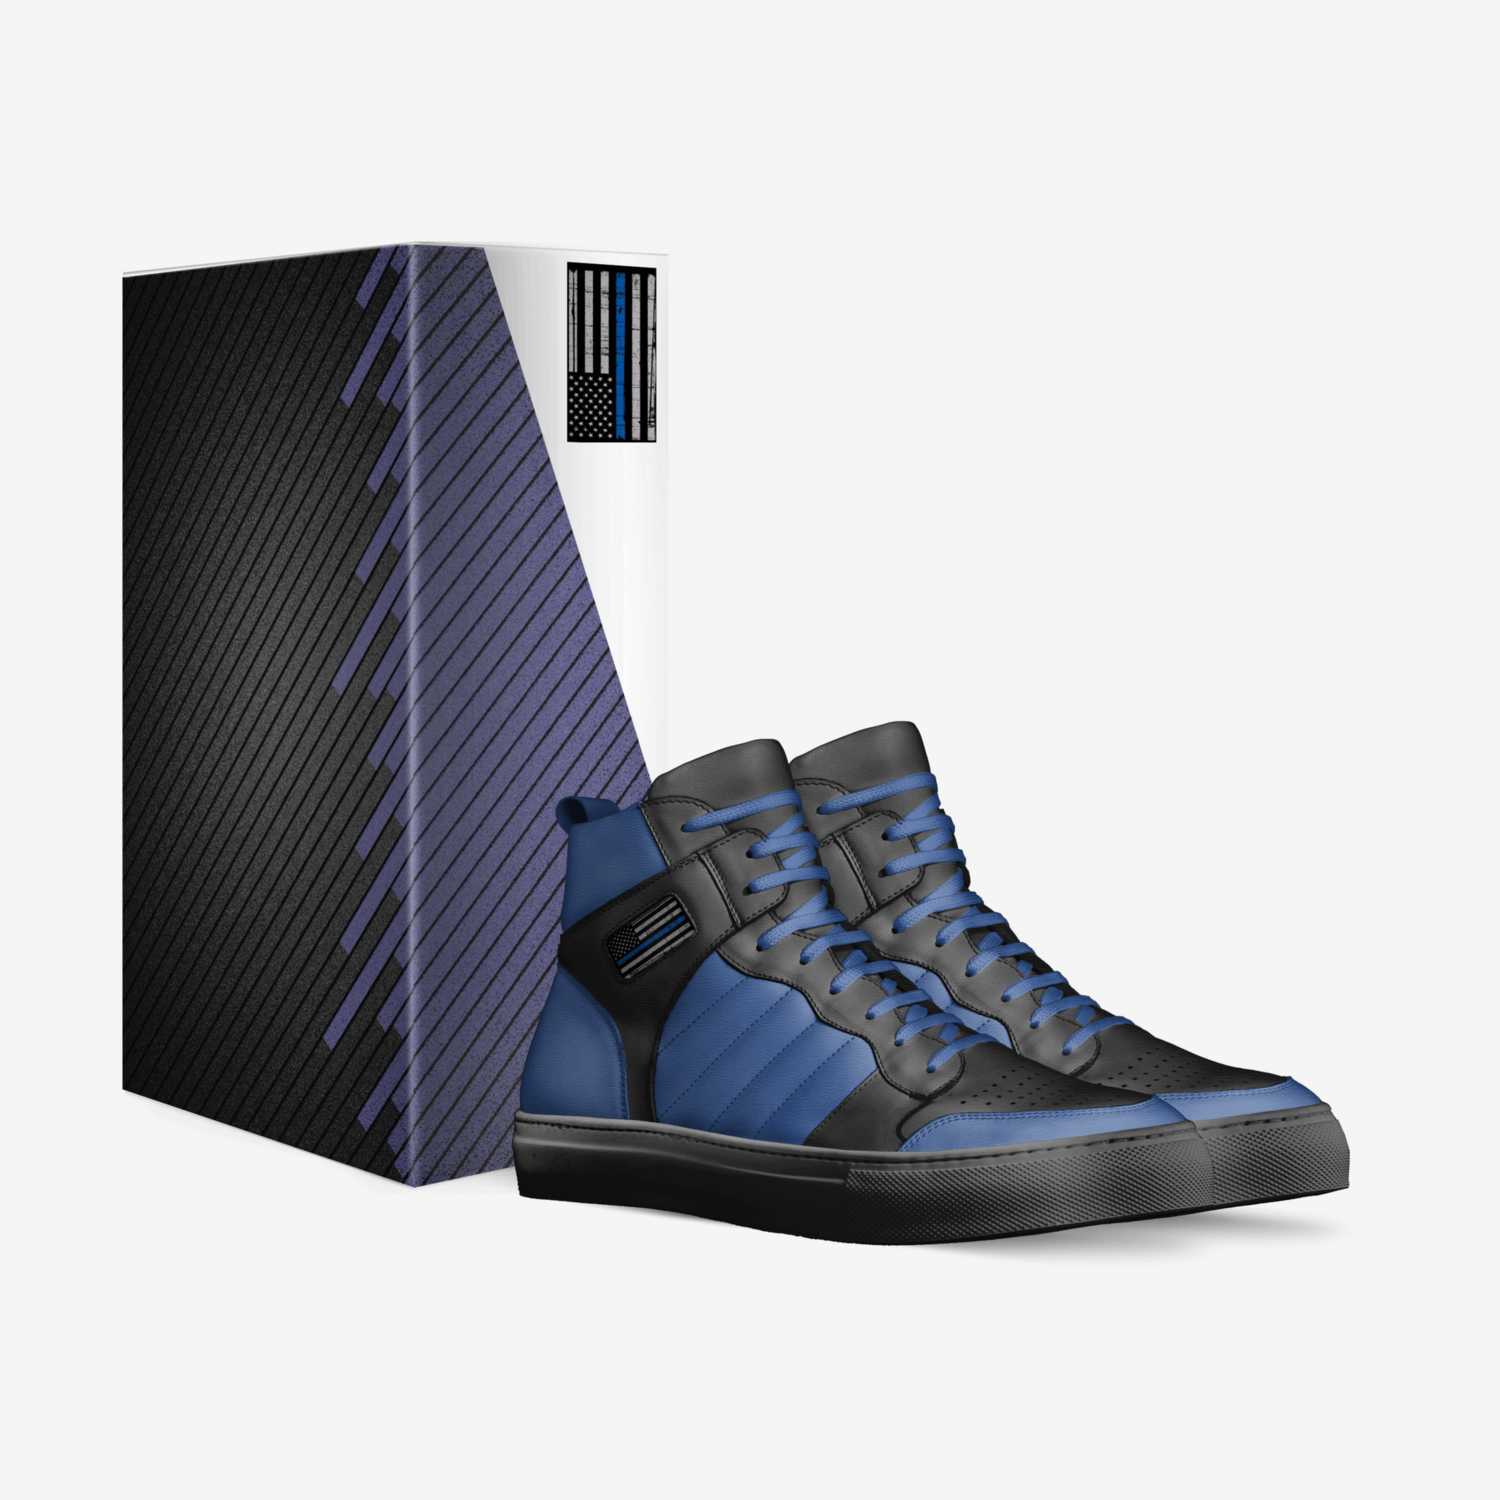 ArcticWalk custom made in Italy shoes by Zachary Macclure | Box view